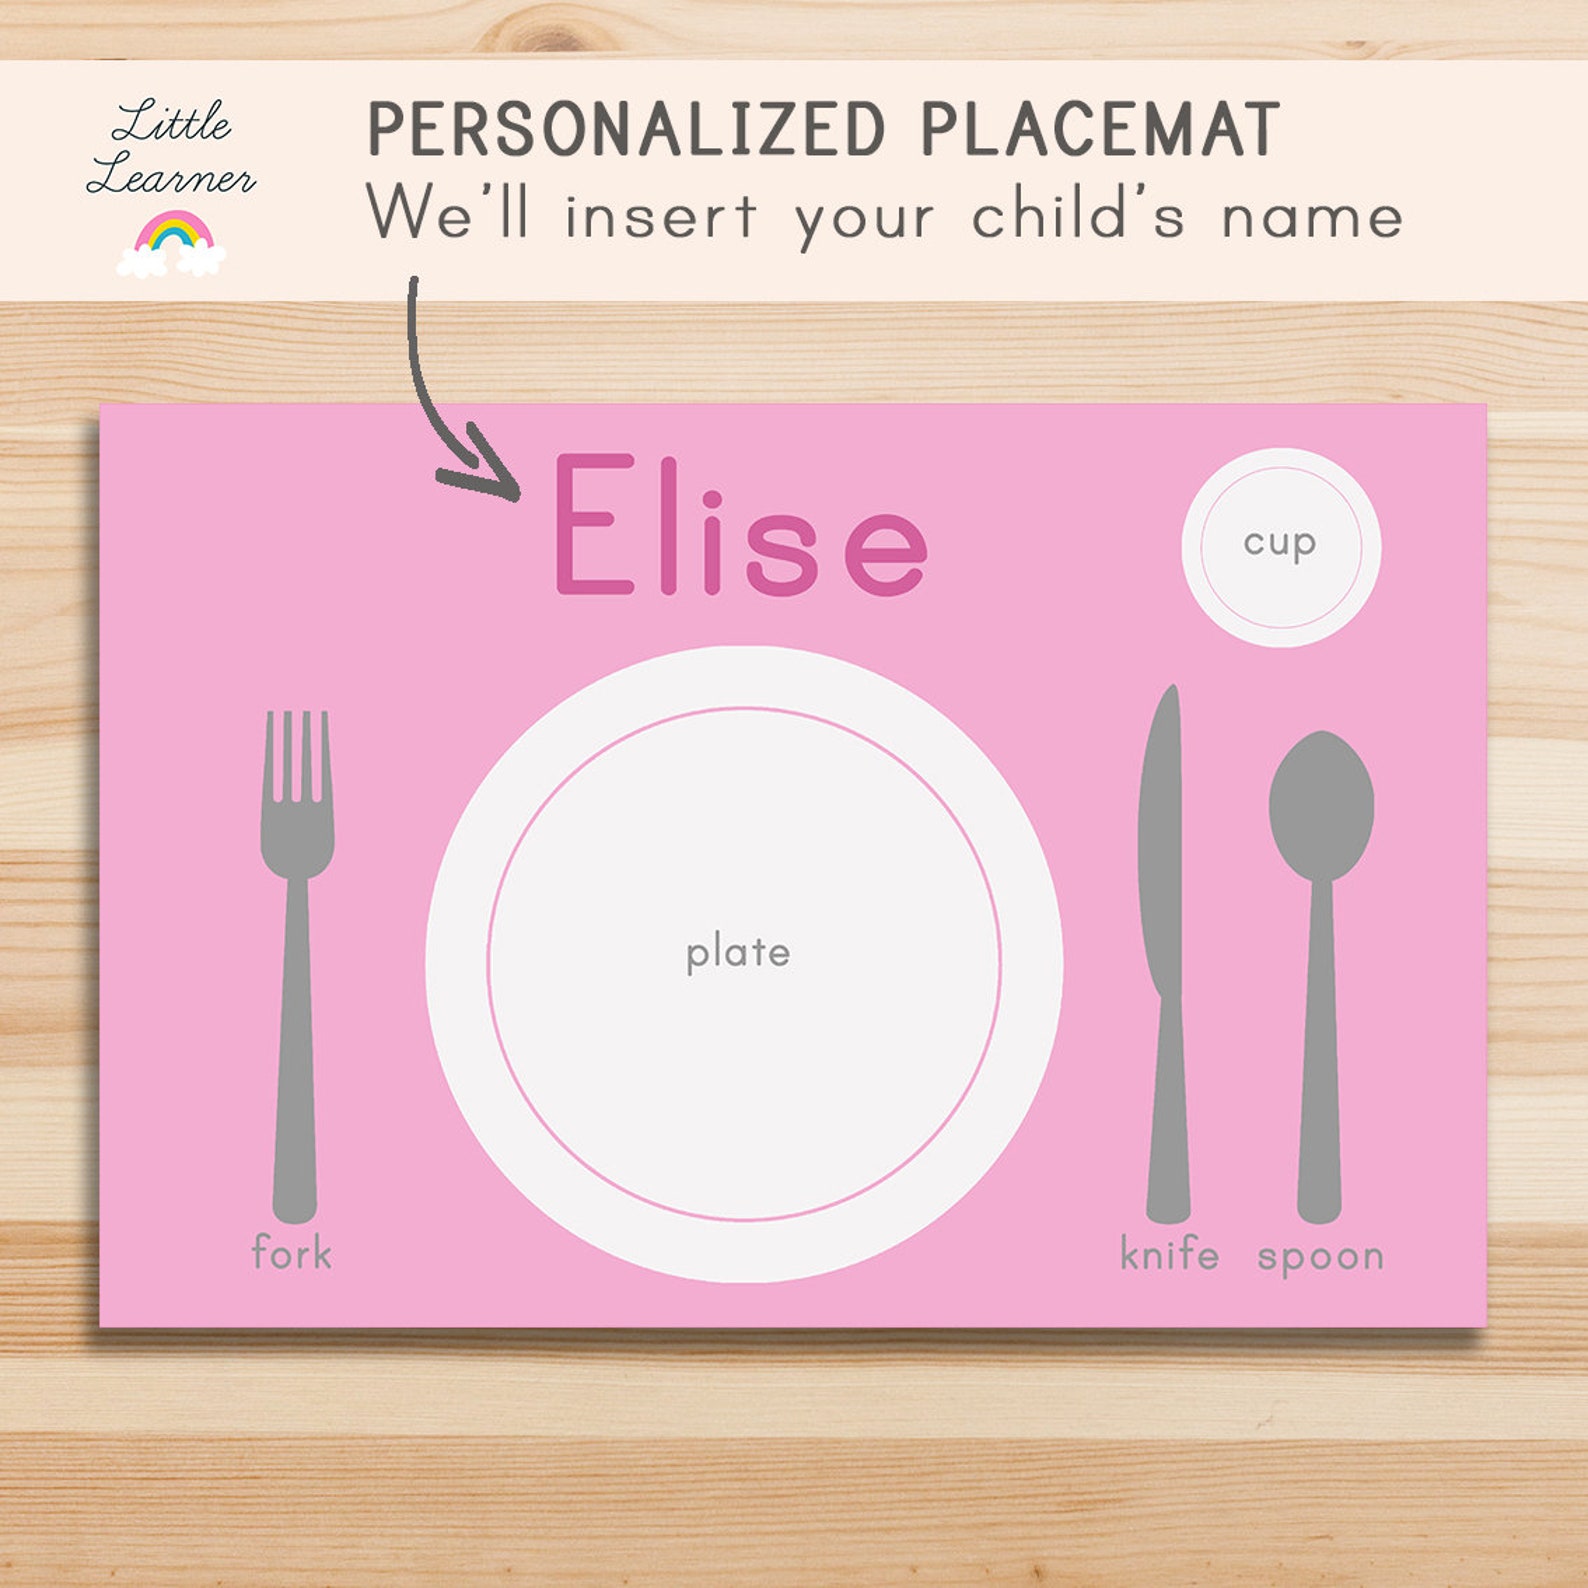 Named place mats